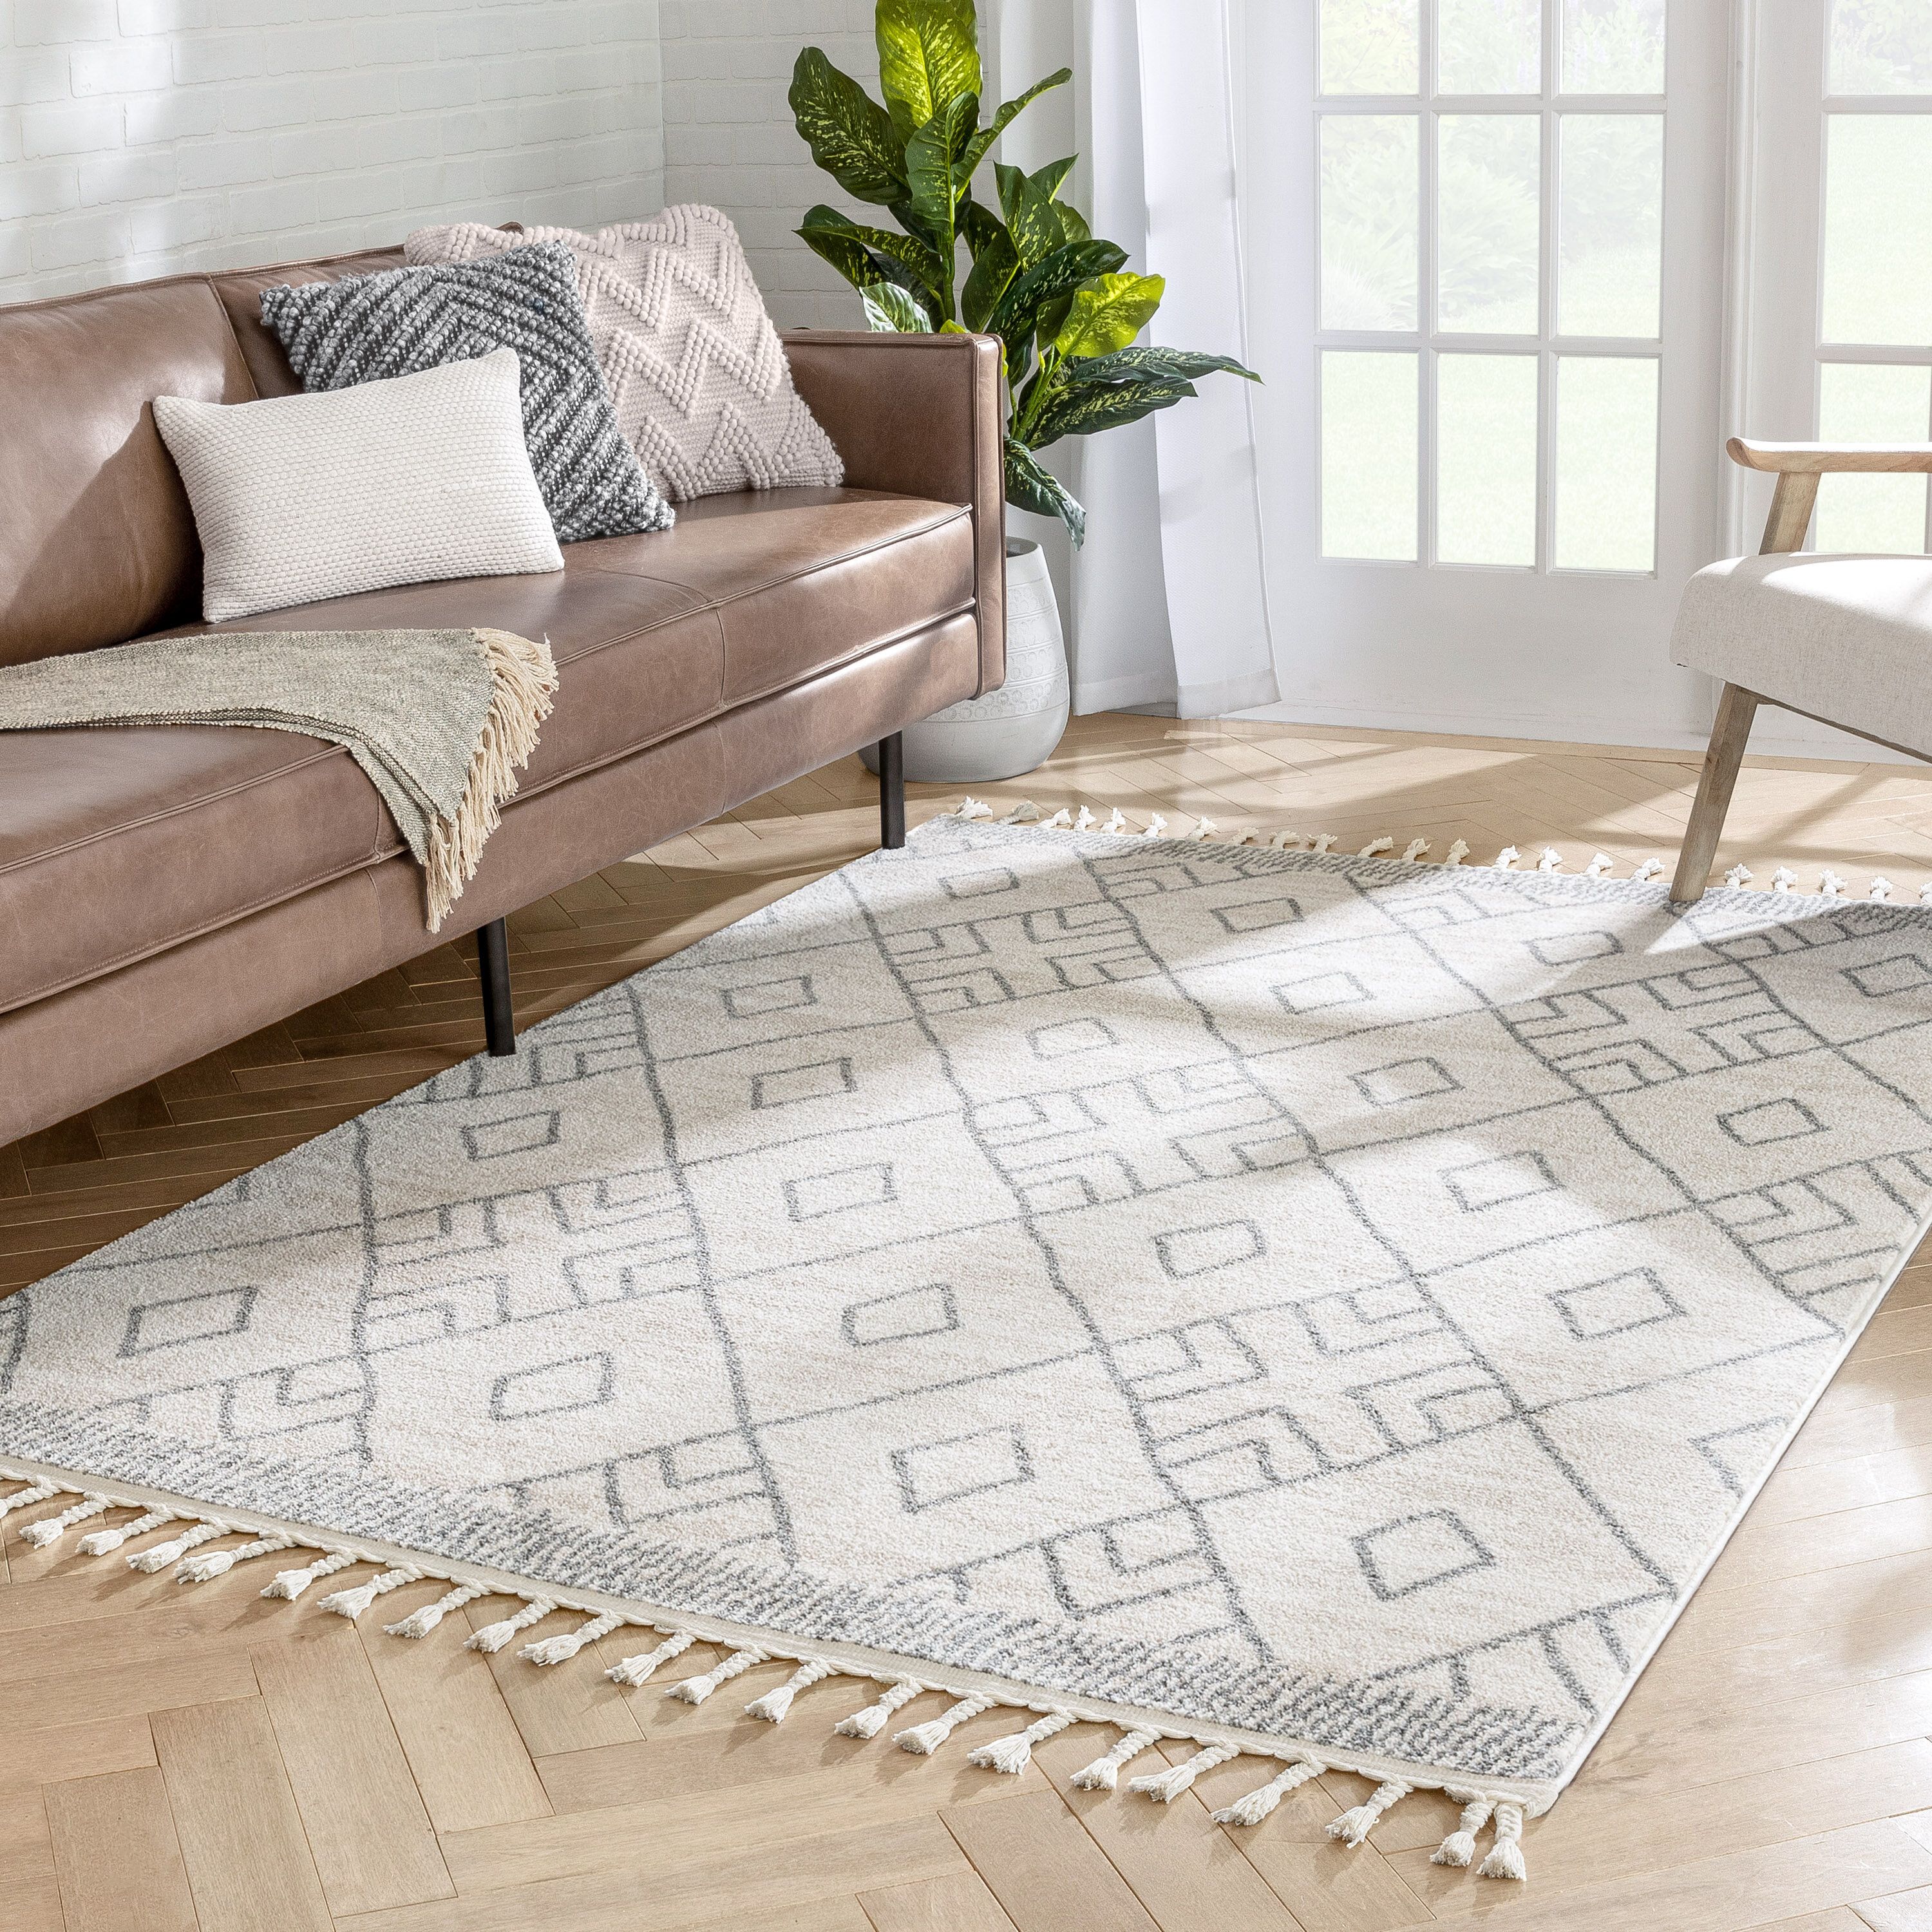 Well Woven Serenity Power Loom Grey/Beige Rug | Wayfair.co.uk Intended For White Serenity Rugs (Photo 9 of 15)